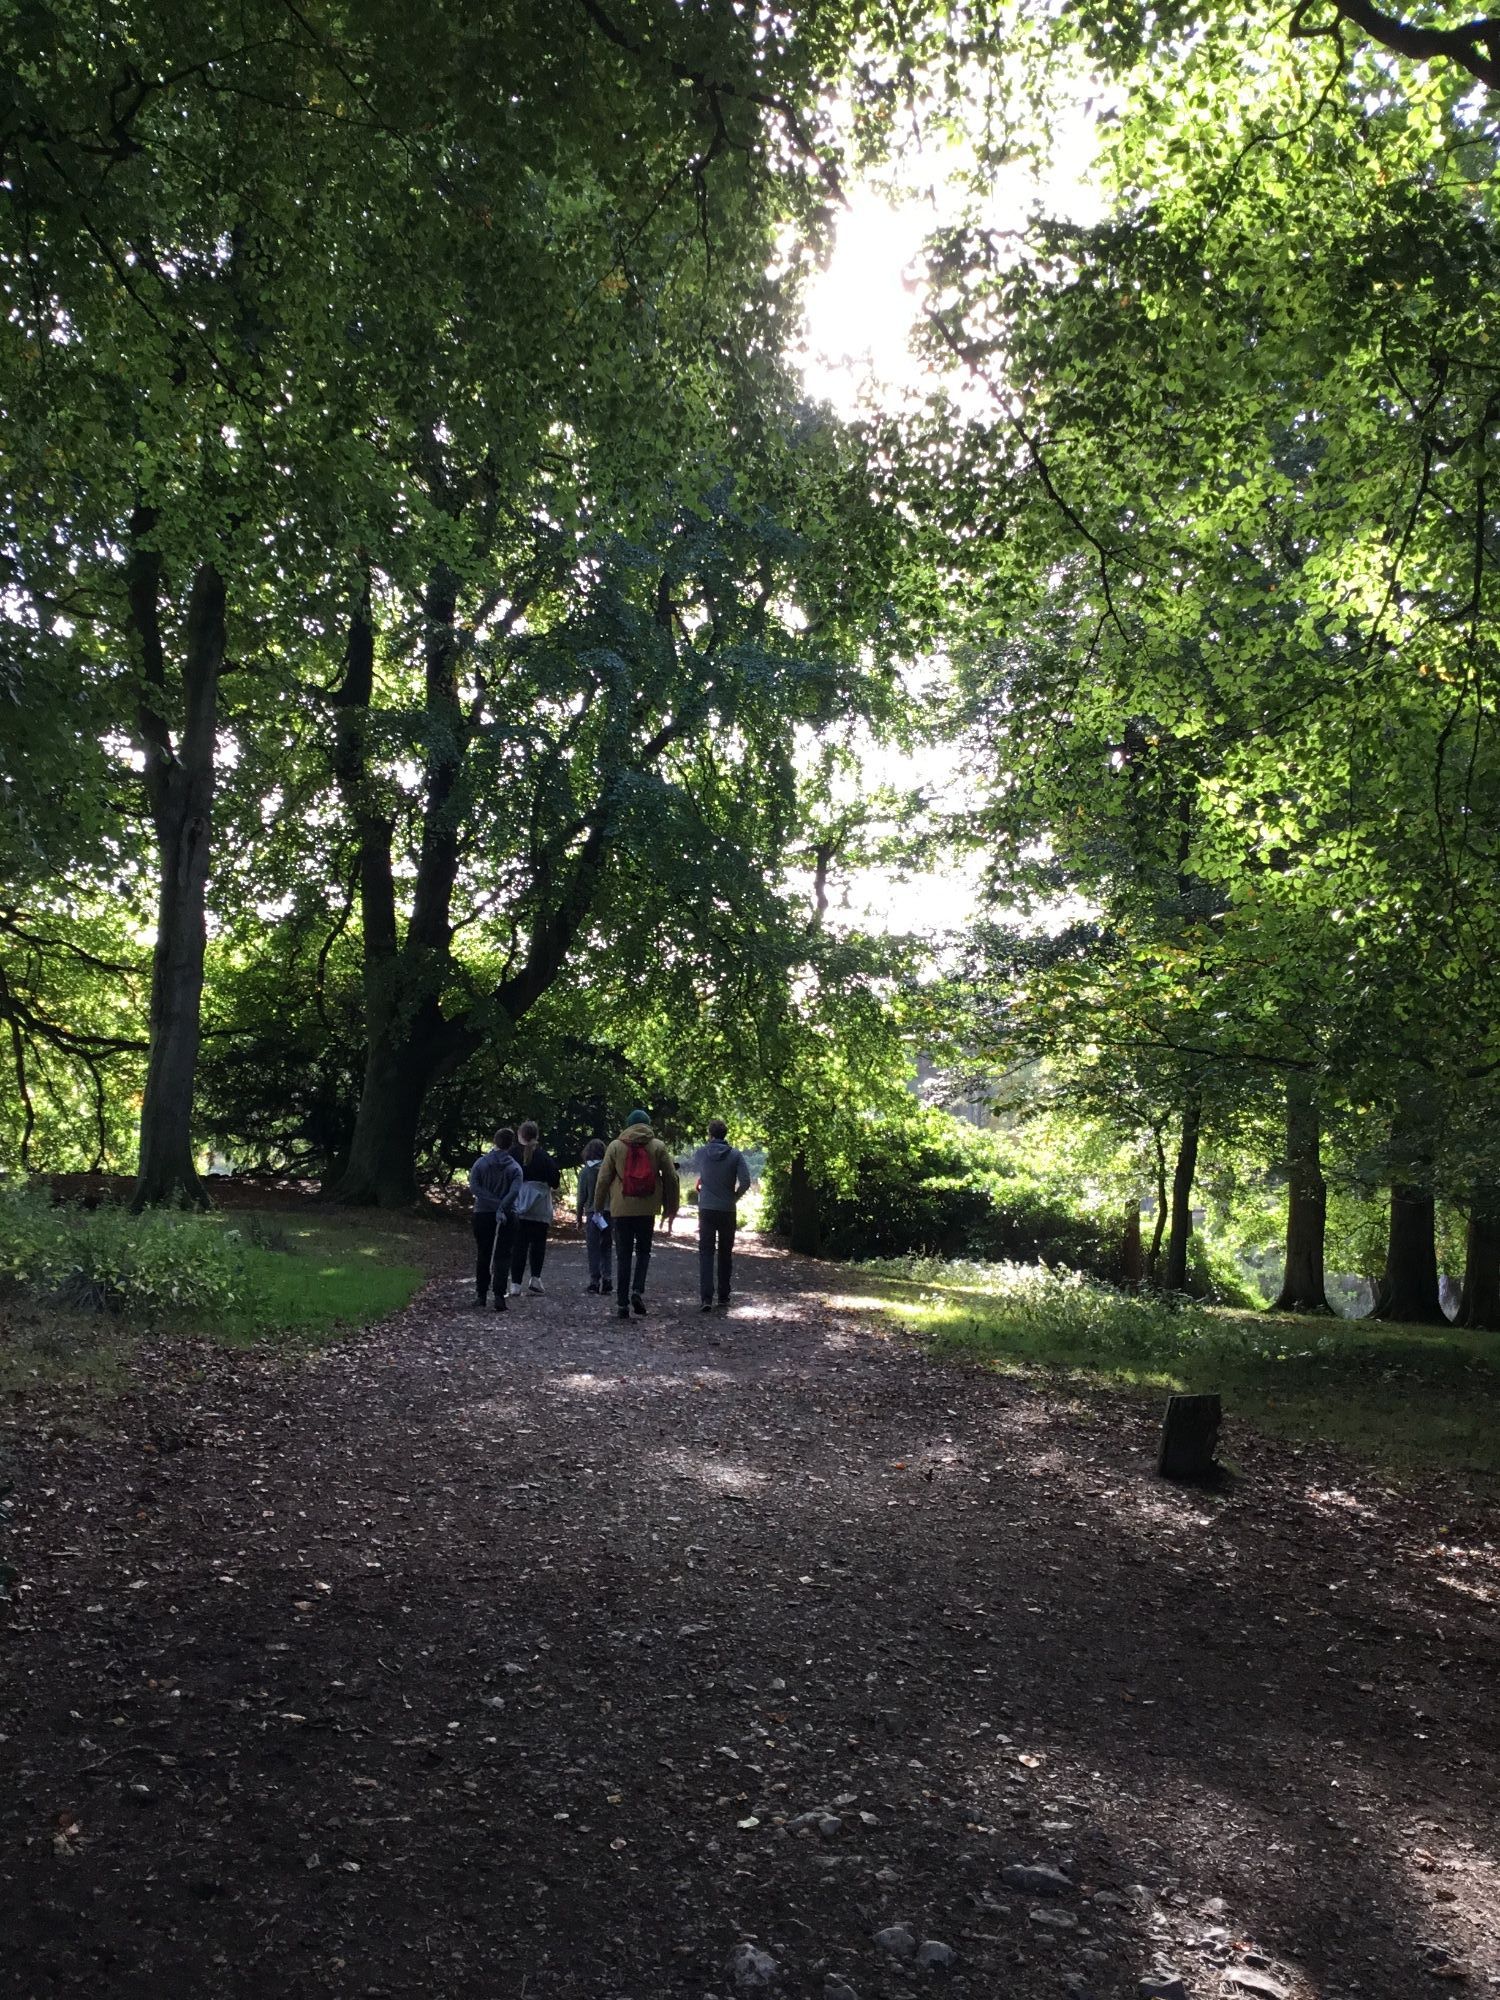 A group of people walking along a path through trees